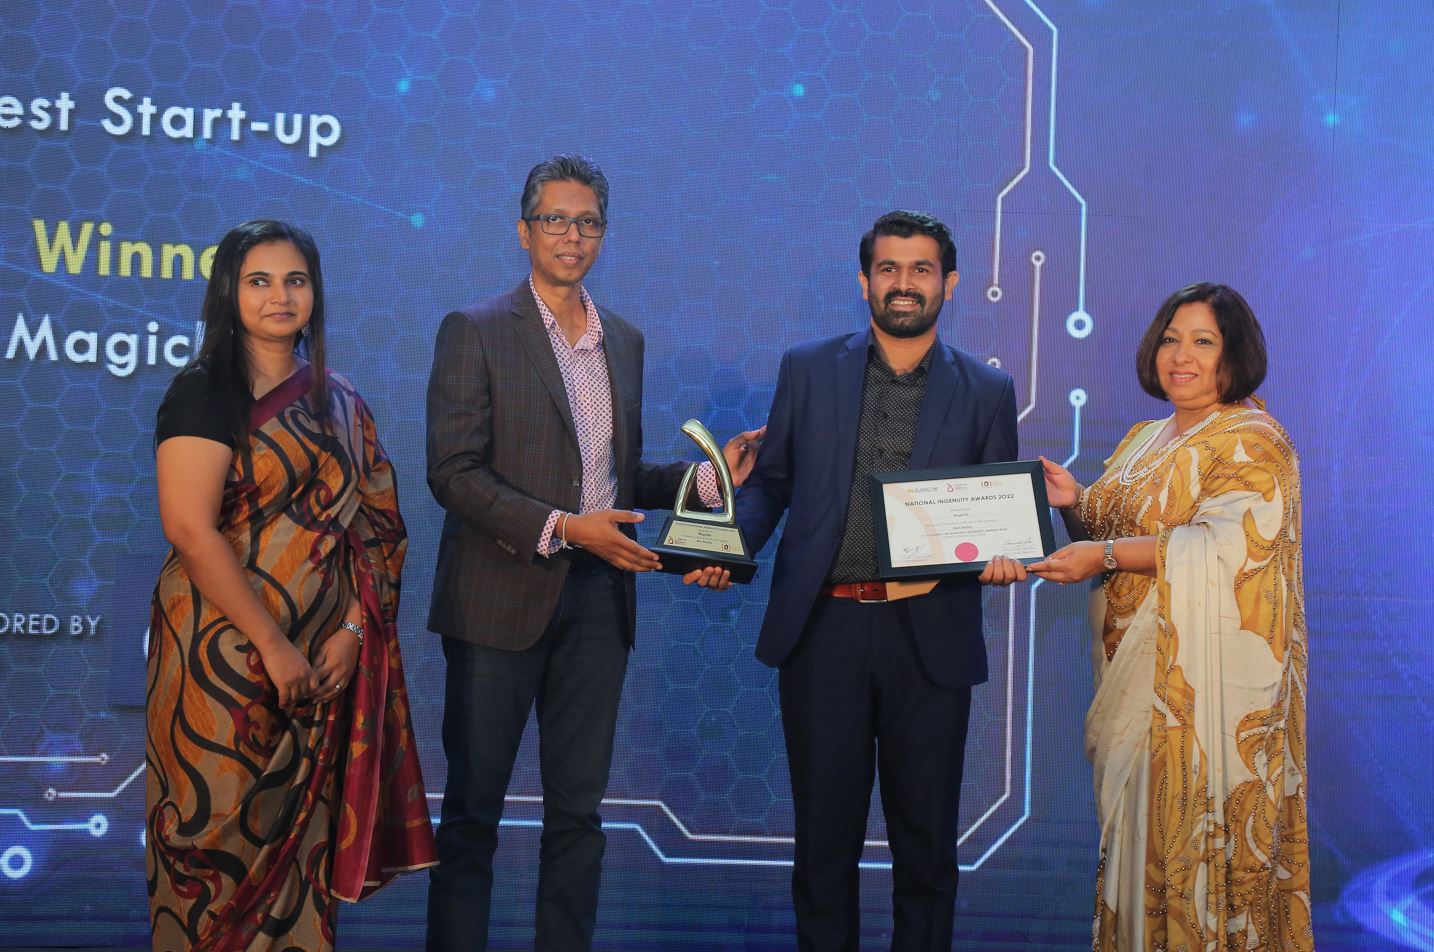 Ed-tech startup Magicbit wins the Startup of the Year Award